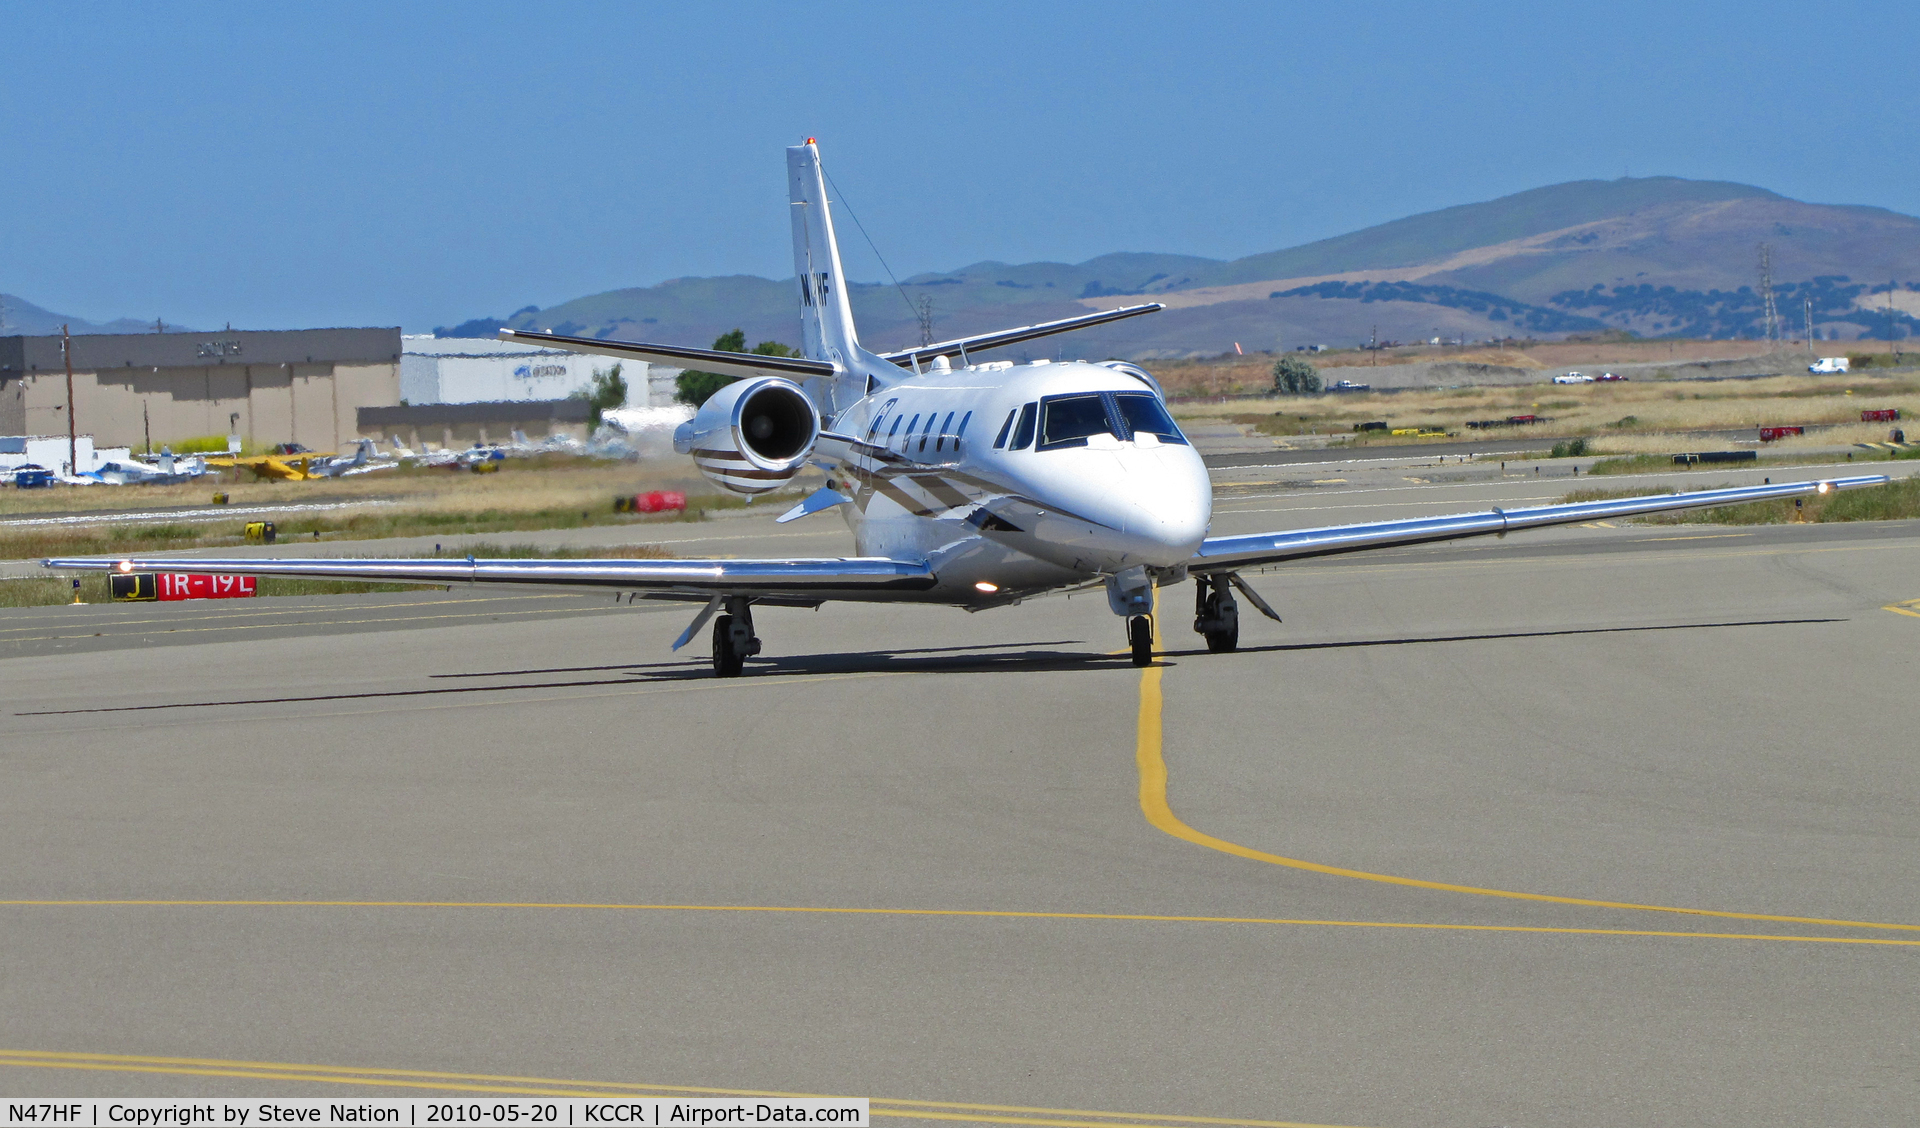 N47HF, 2003 Cessna 560XL C/N 560-5347, Near head-on shot of 2003 Cessna 560XL taxying for take-off